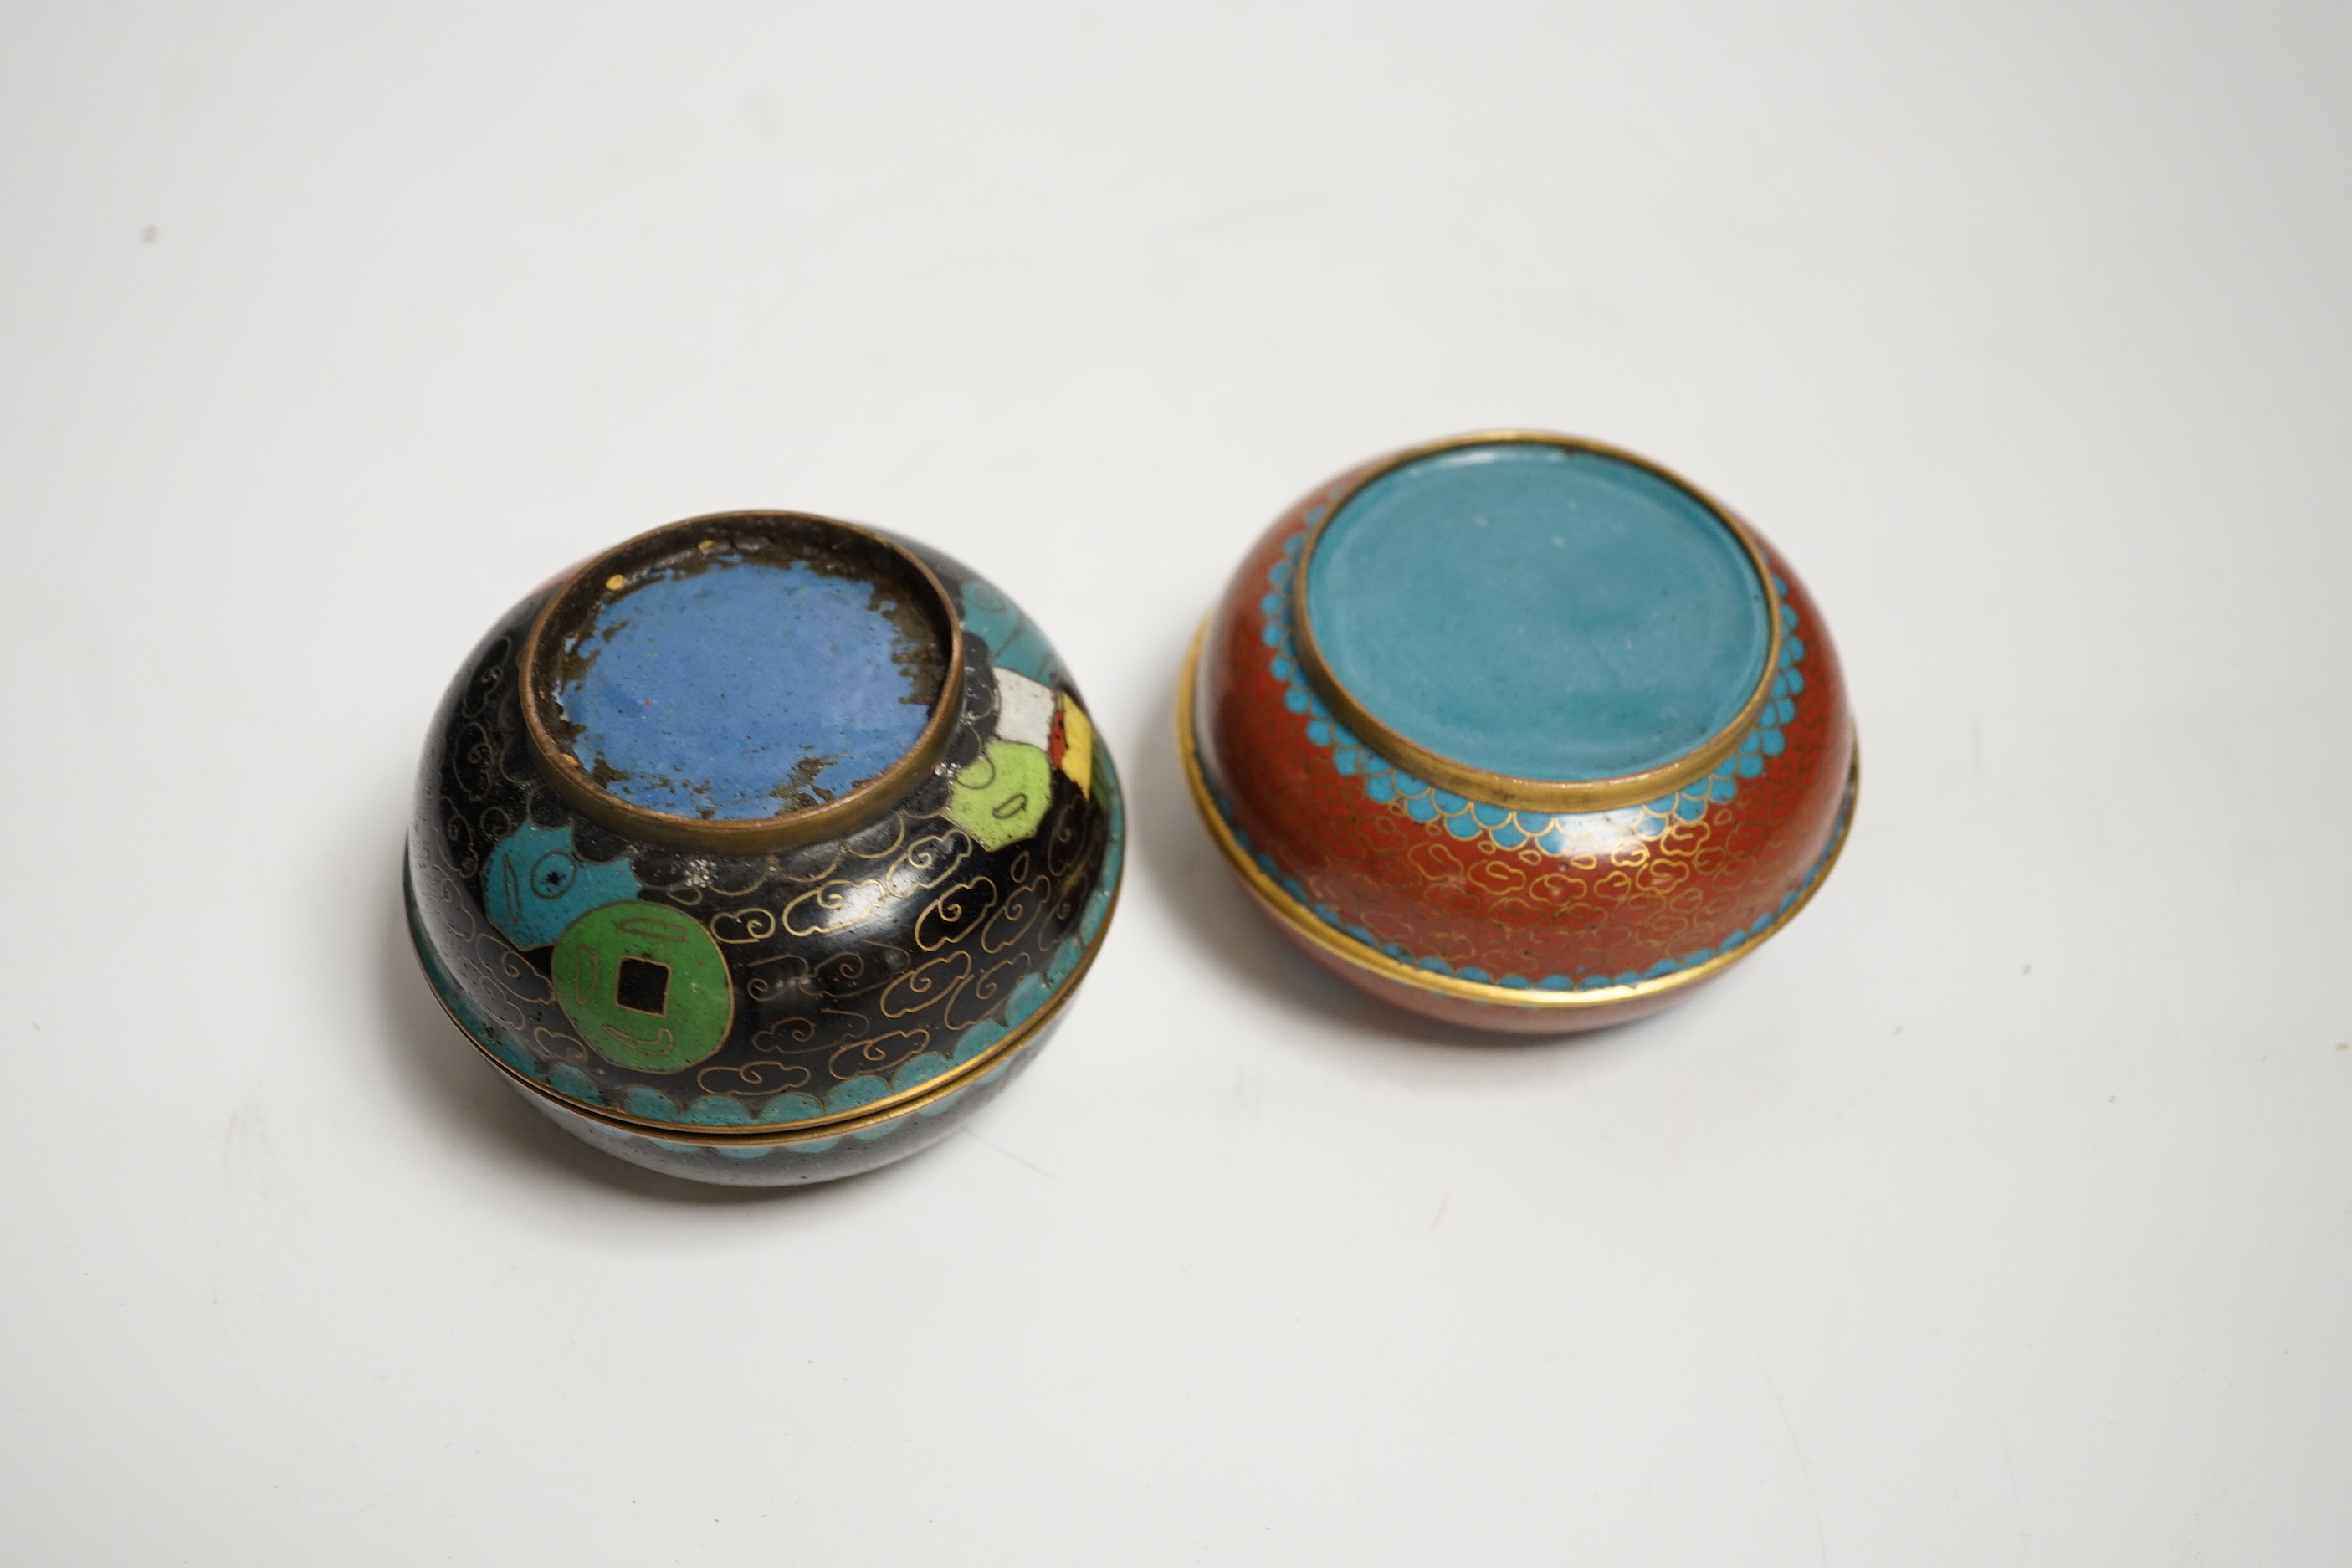 Two Chinese cloisonné enamel domed boxes and covers, one 19th century, the other 20th century. Tallest 6cm